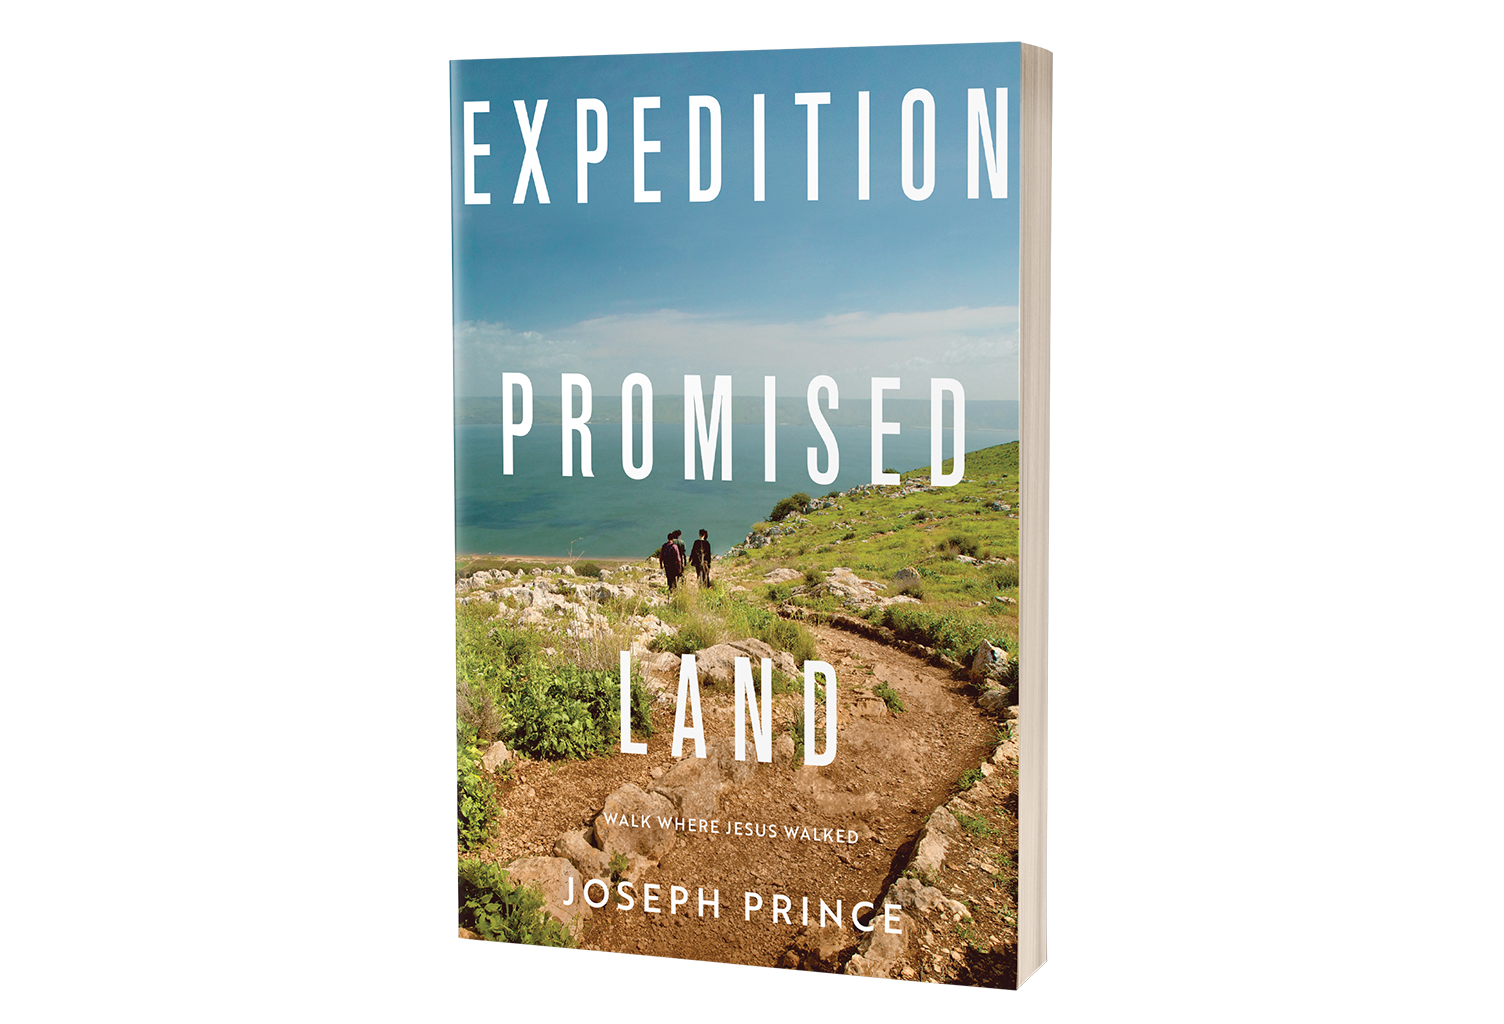 Expedition Promised Land by Joseph Prince by TBN